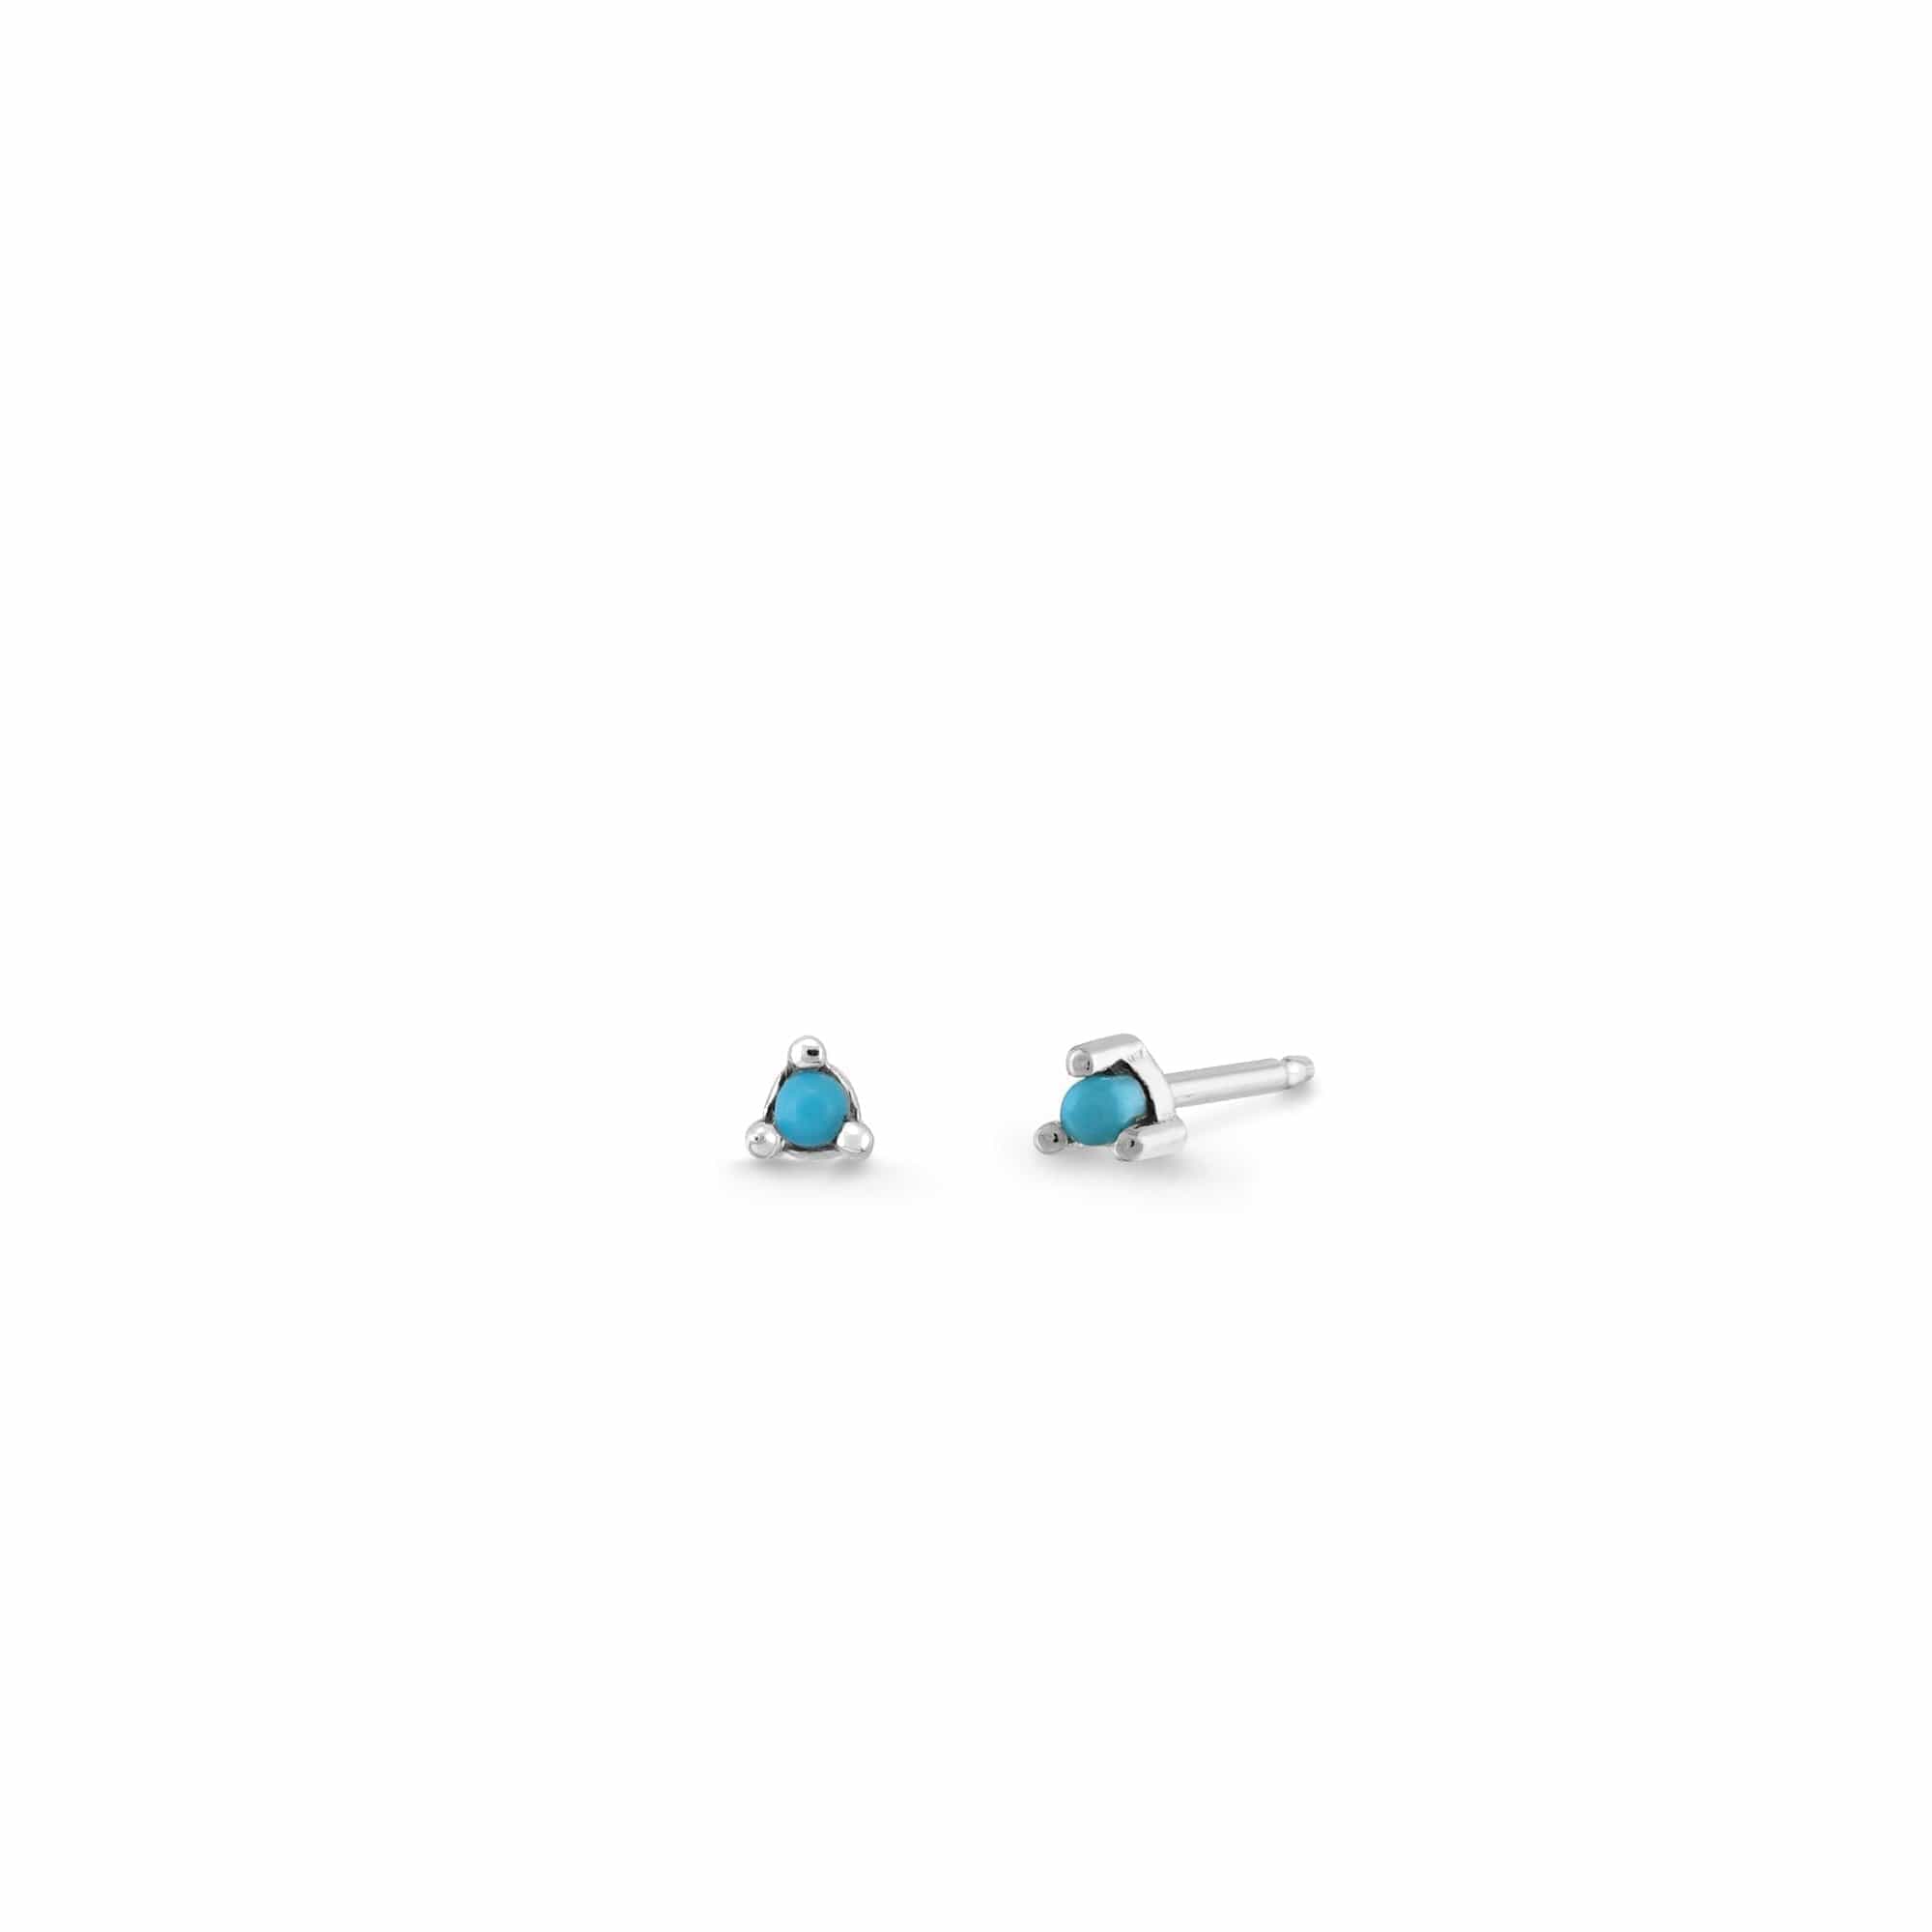 Boma Jewelry Earrings Turquoise / Sterling Silver Mini Gemstone Studs